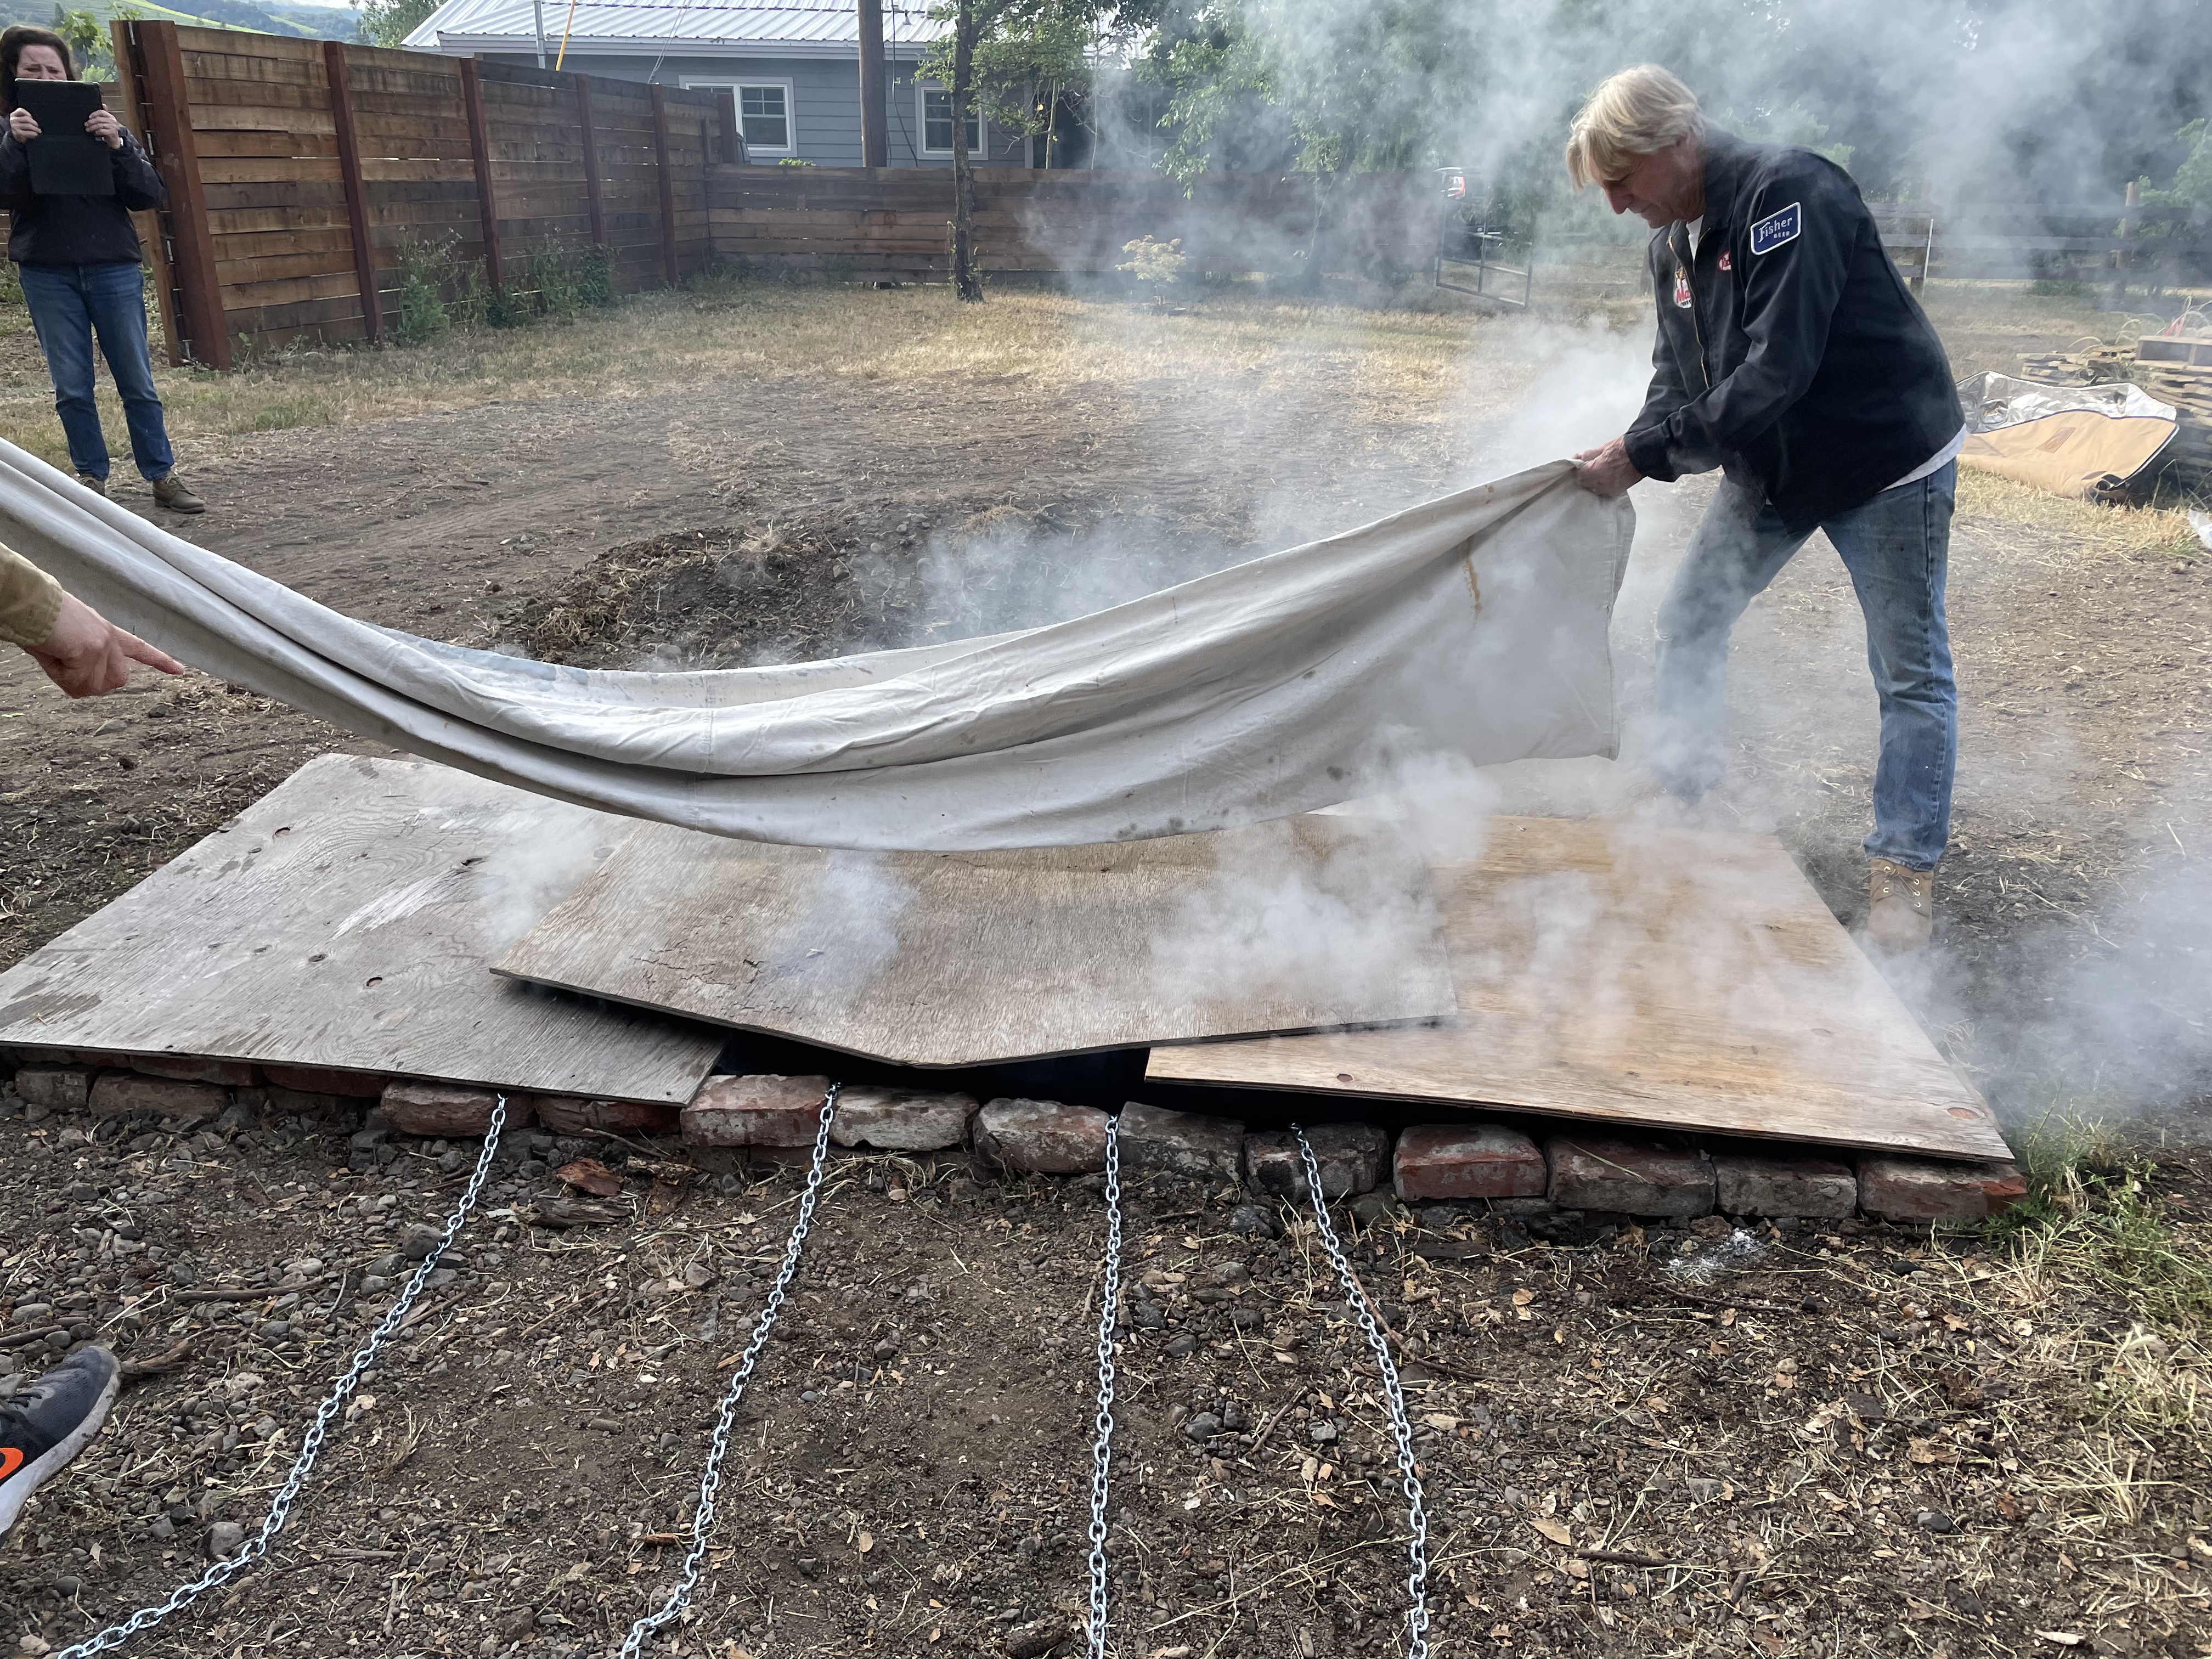 Laying canvas over the plywood lid. It's good to use a single piece of canvas or tarp big enough to cover the whole pit, as you can then easily fold it back and move all the soil off in a single action afterwards.